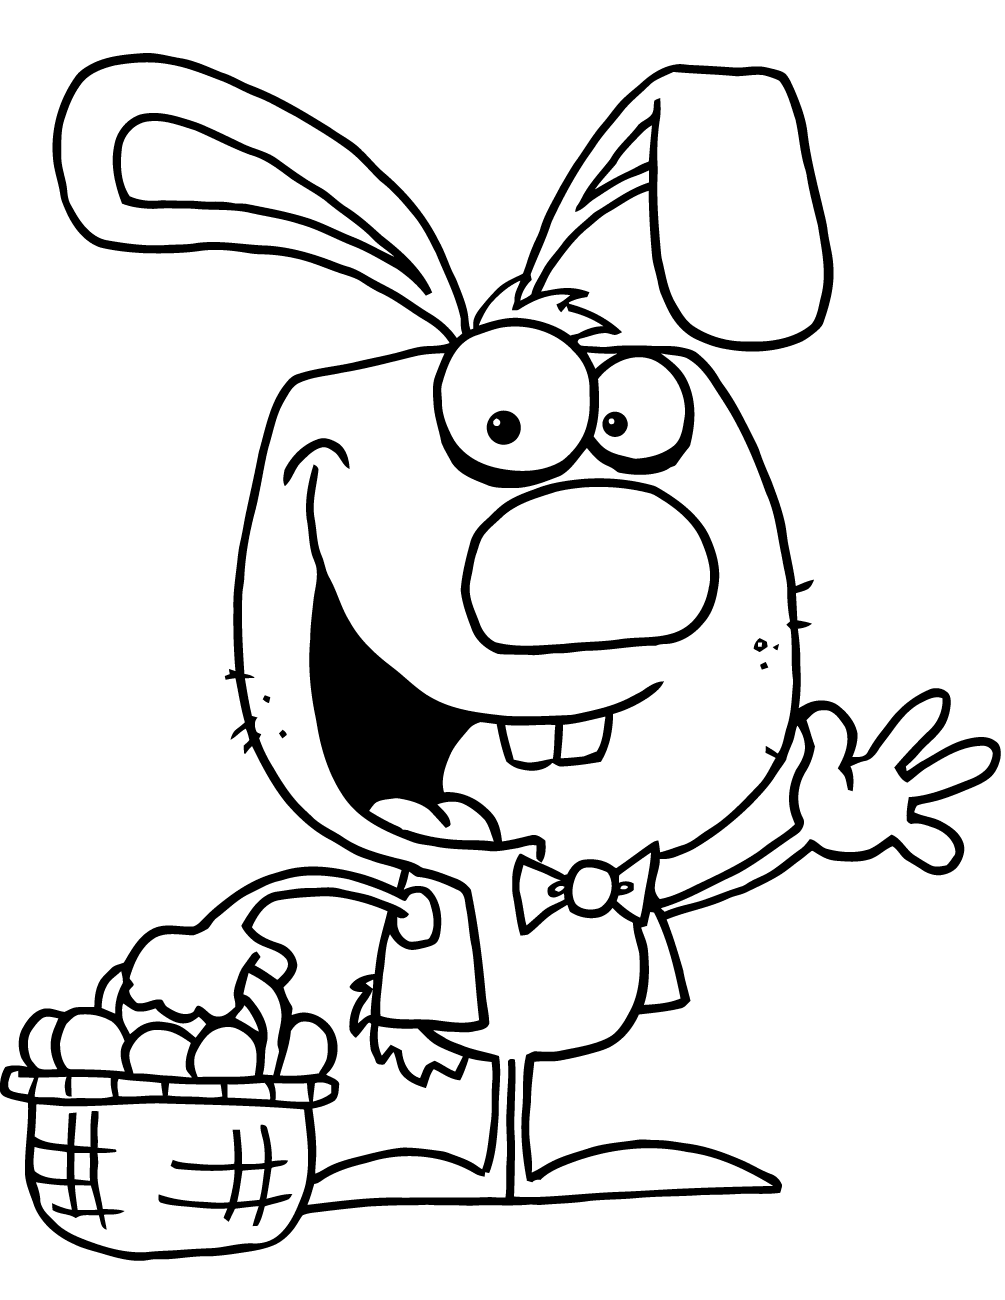 Happy Easter Bunny With Basket Of Eggs Coloring Page